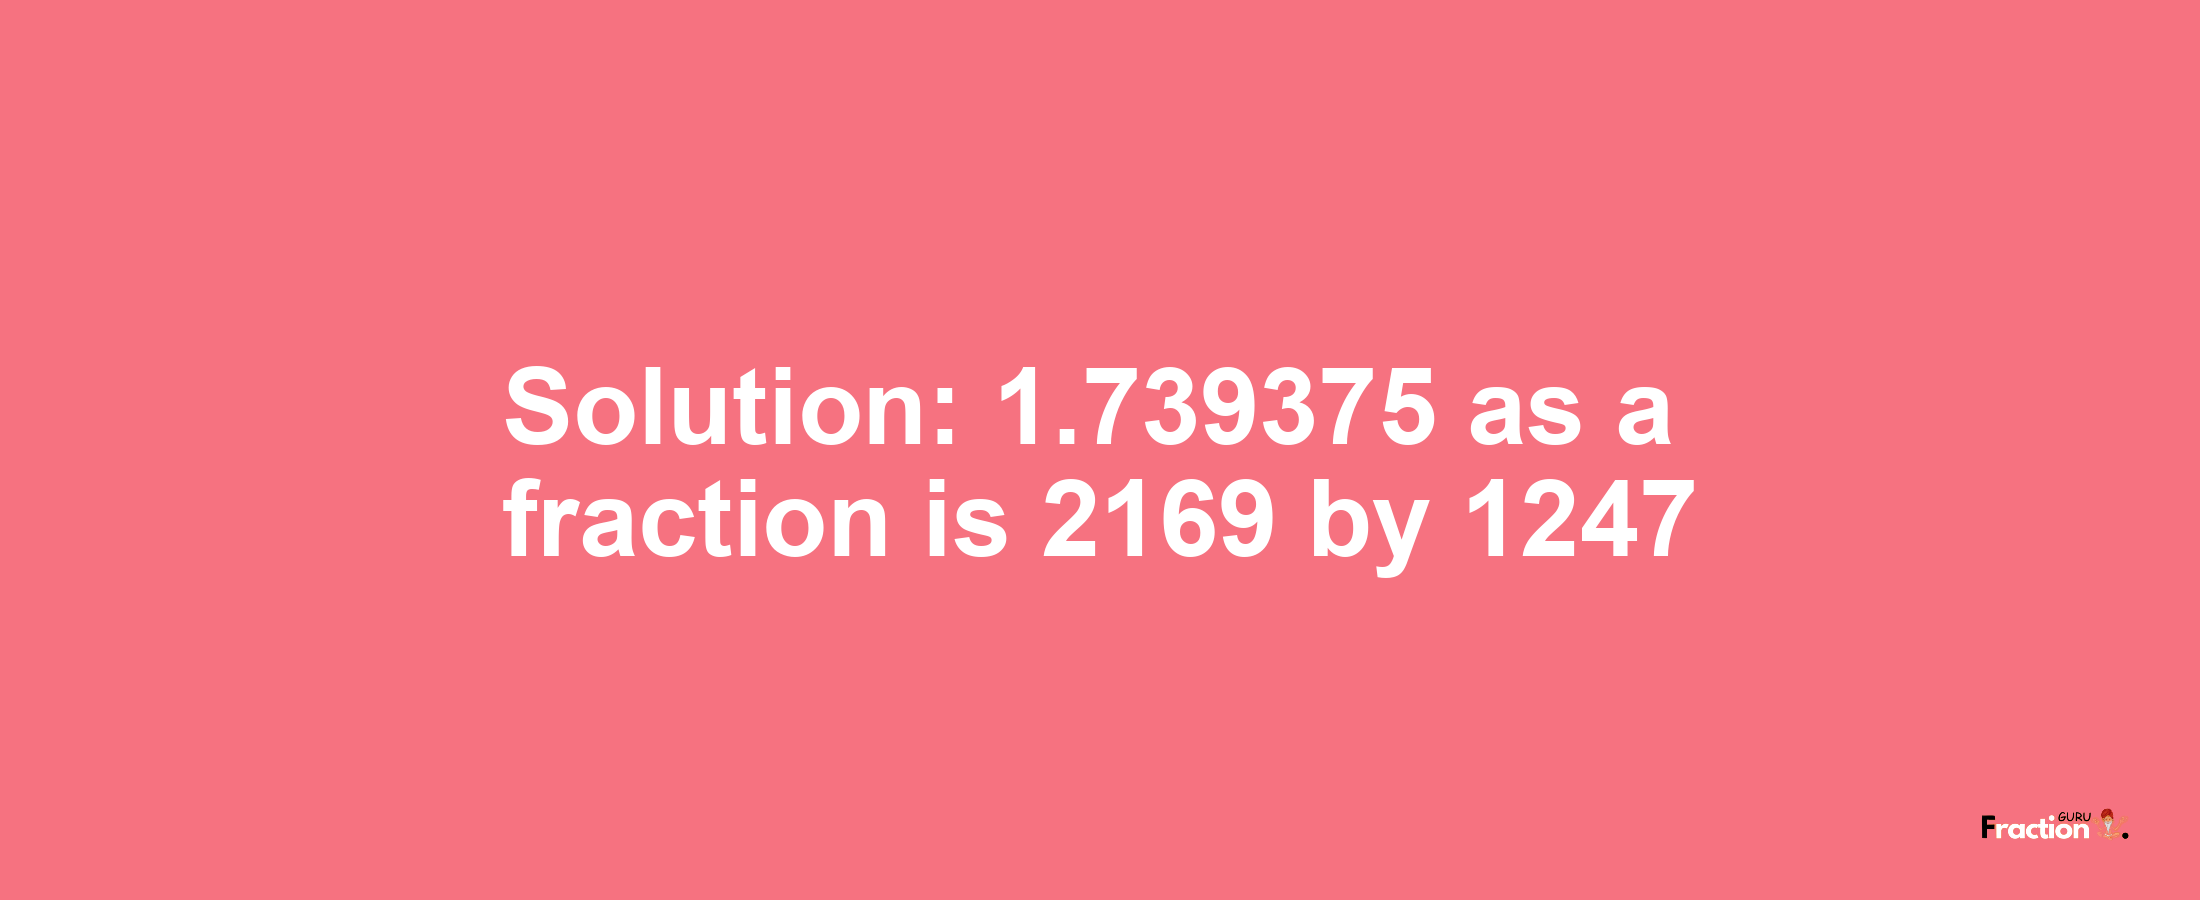 Solution:1.739375 as a fraction is 2169/1247